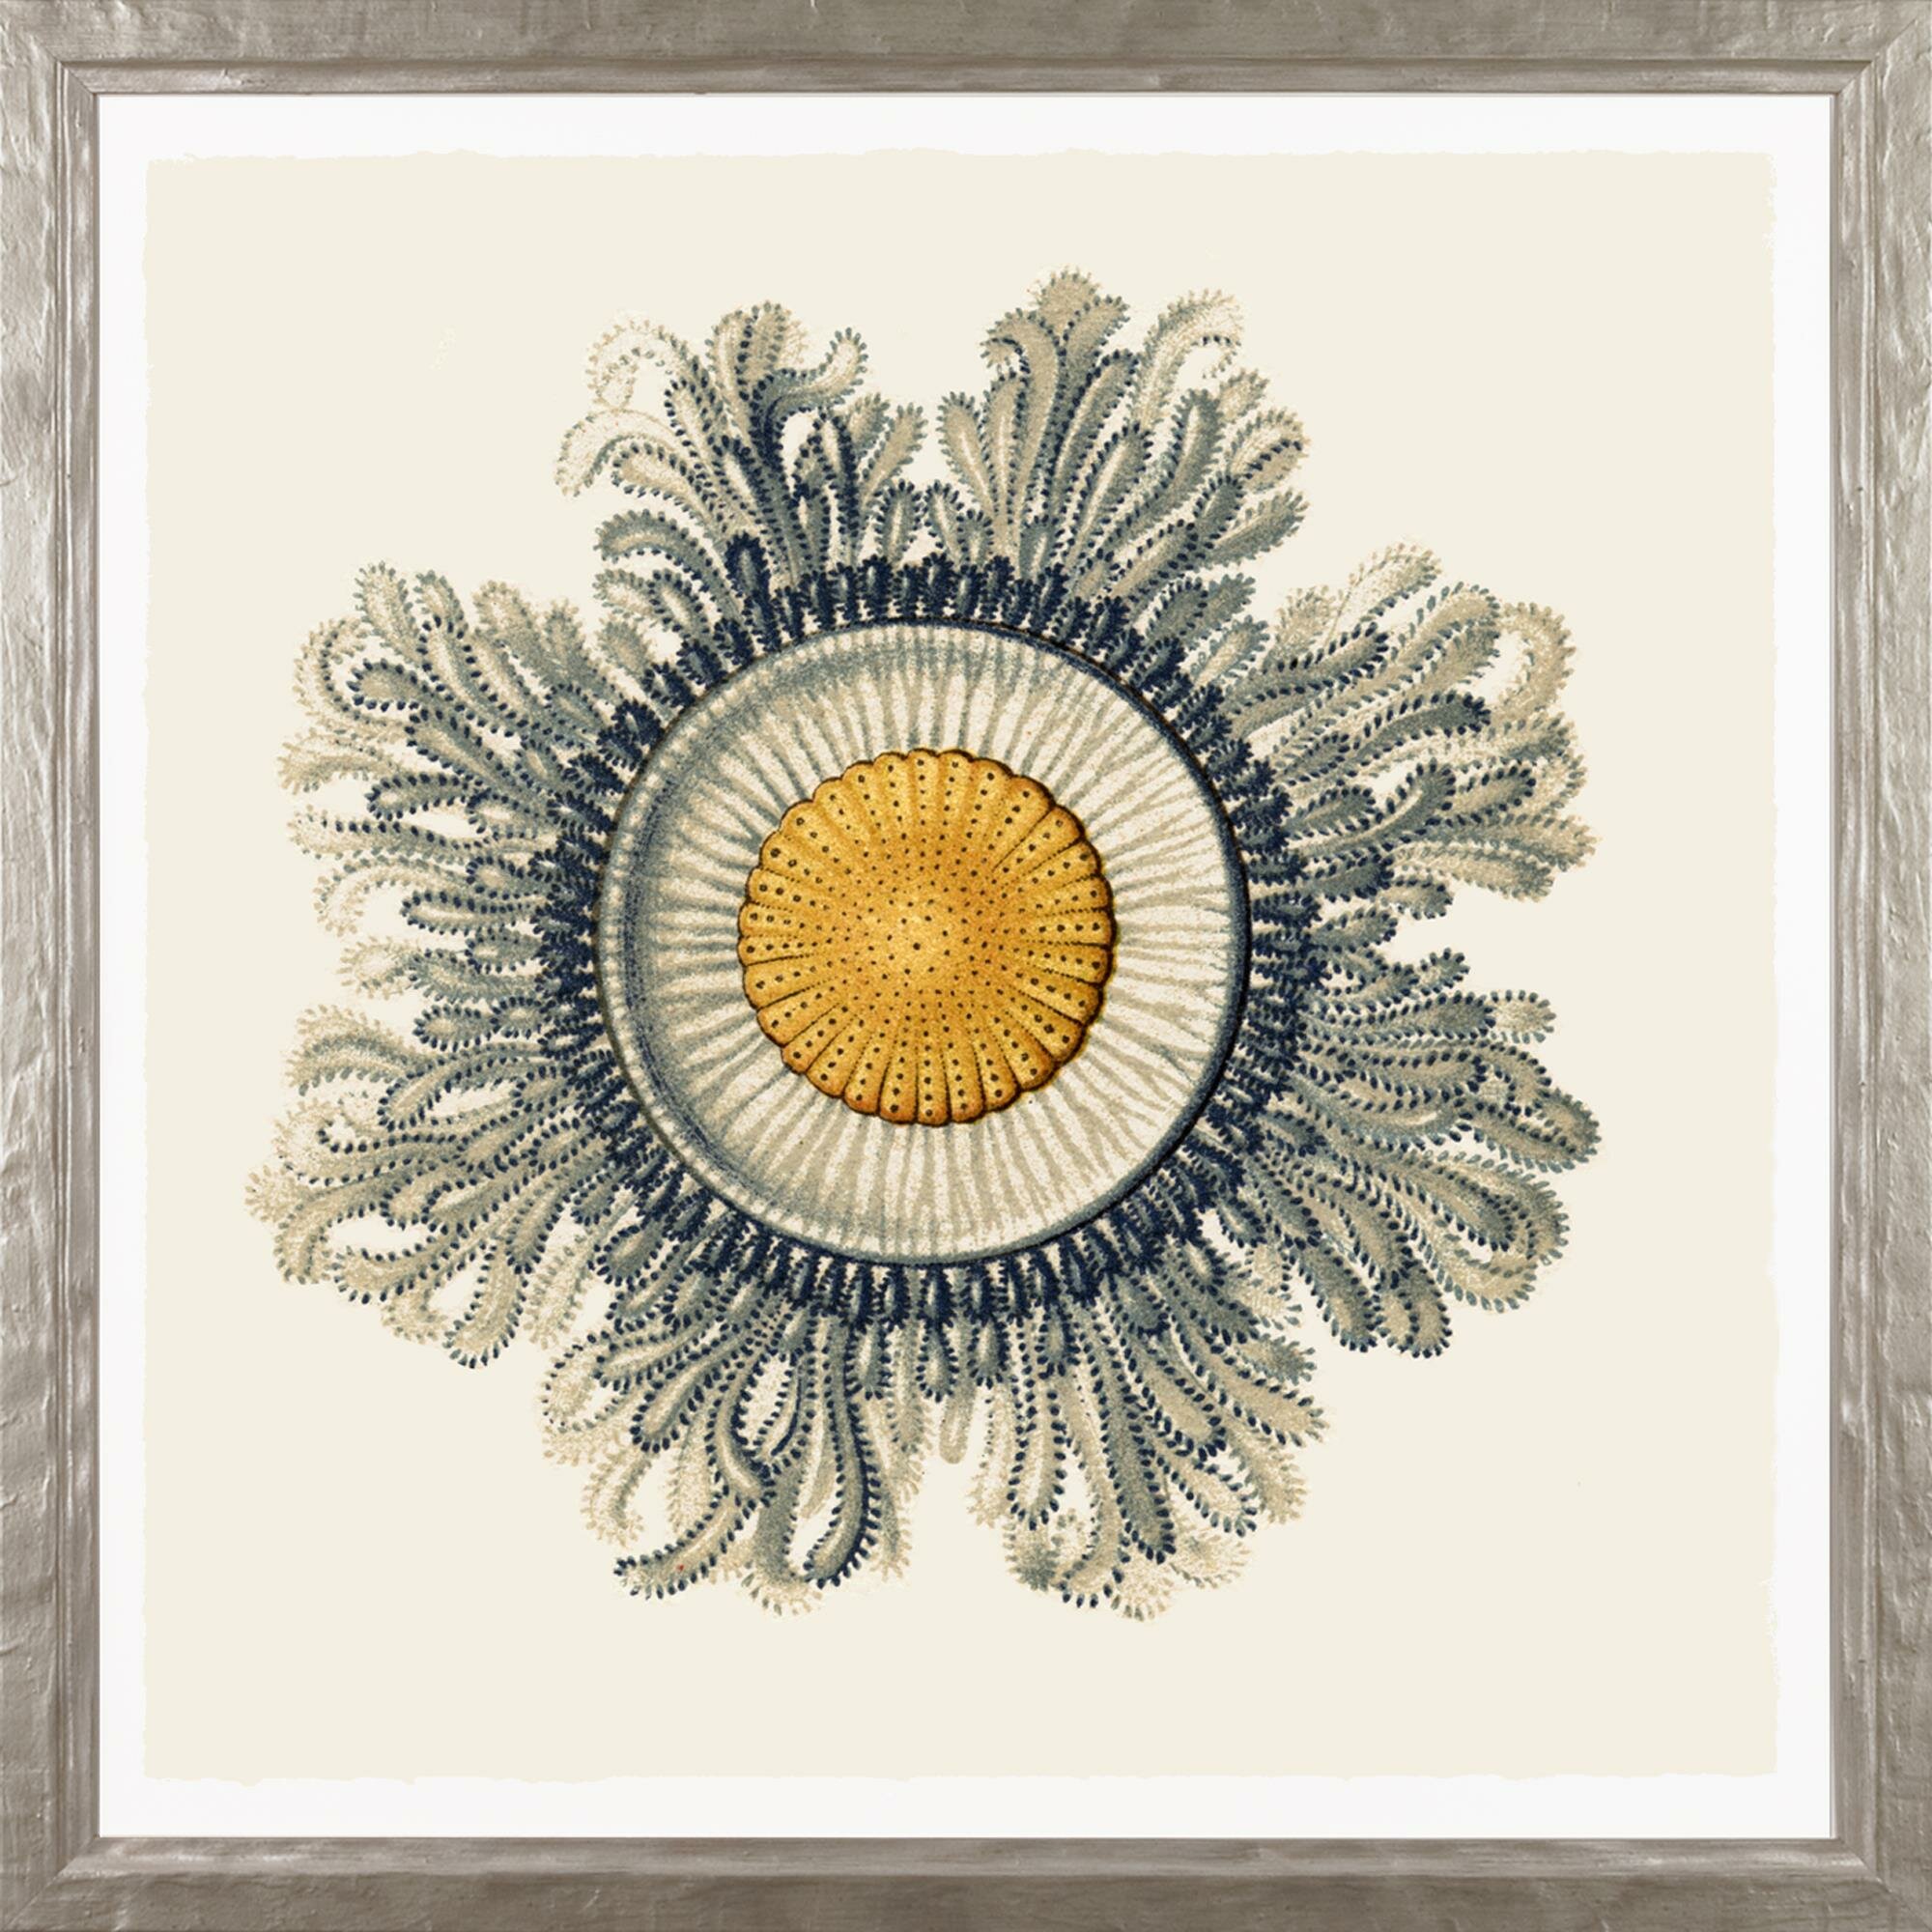 Art Virtuoso Art Forms In Nature By Ernst Haeckel Picture Frame Graphic Art Print On Paper Wayfair